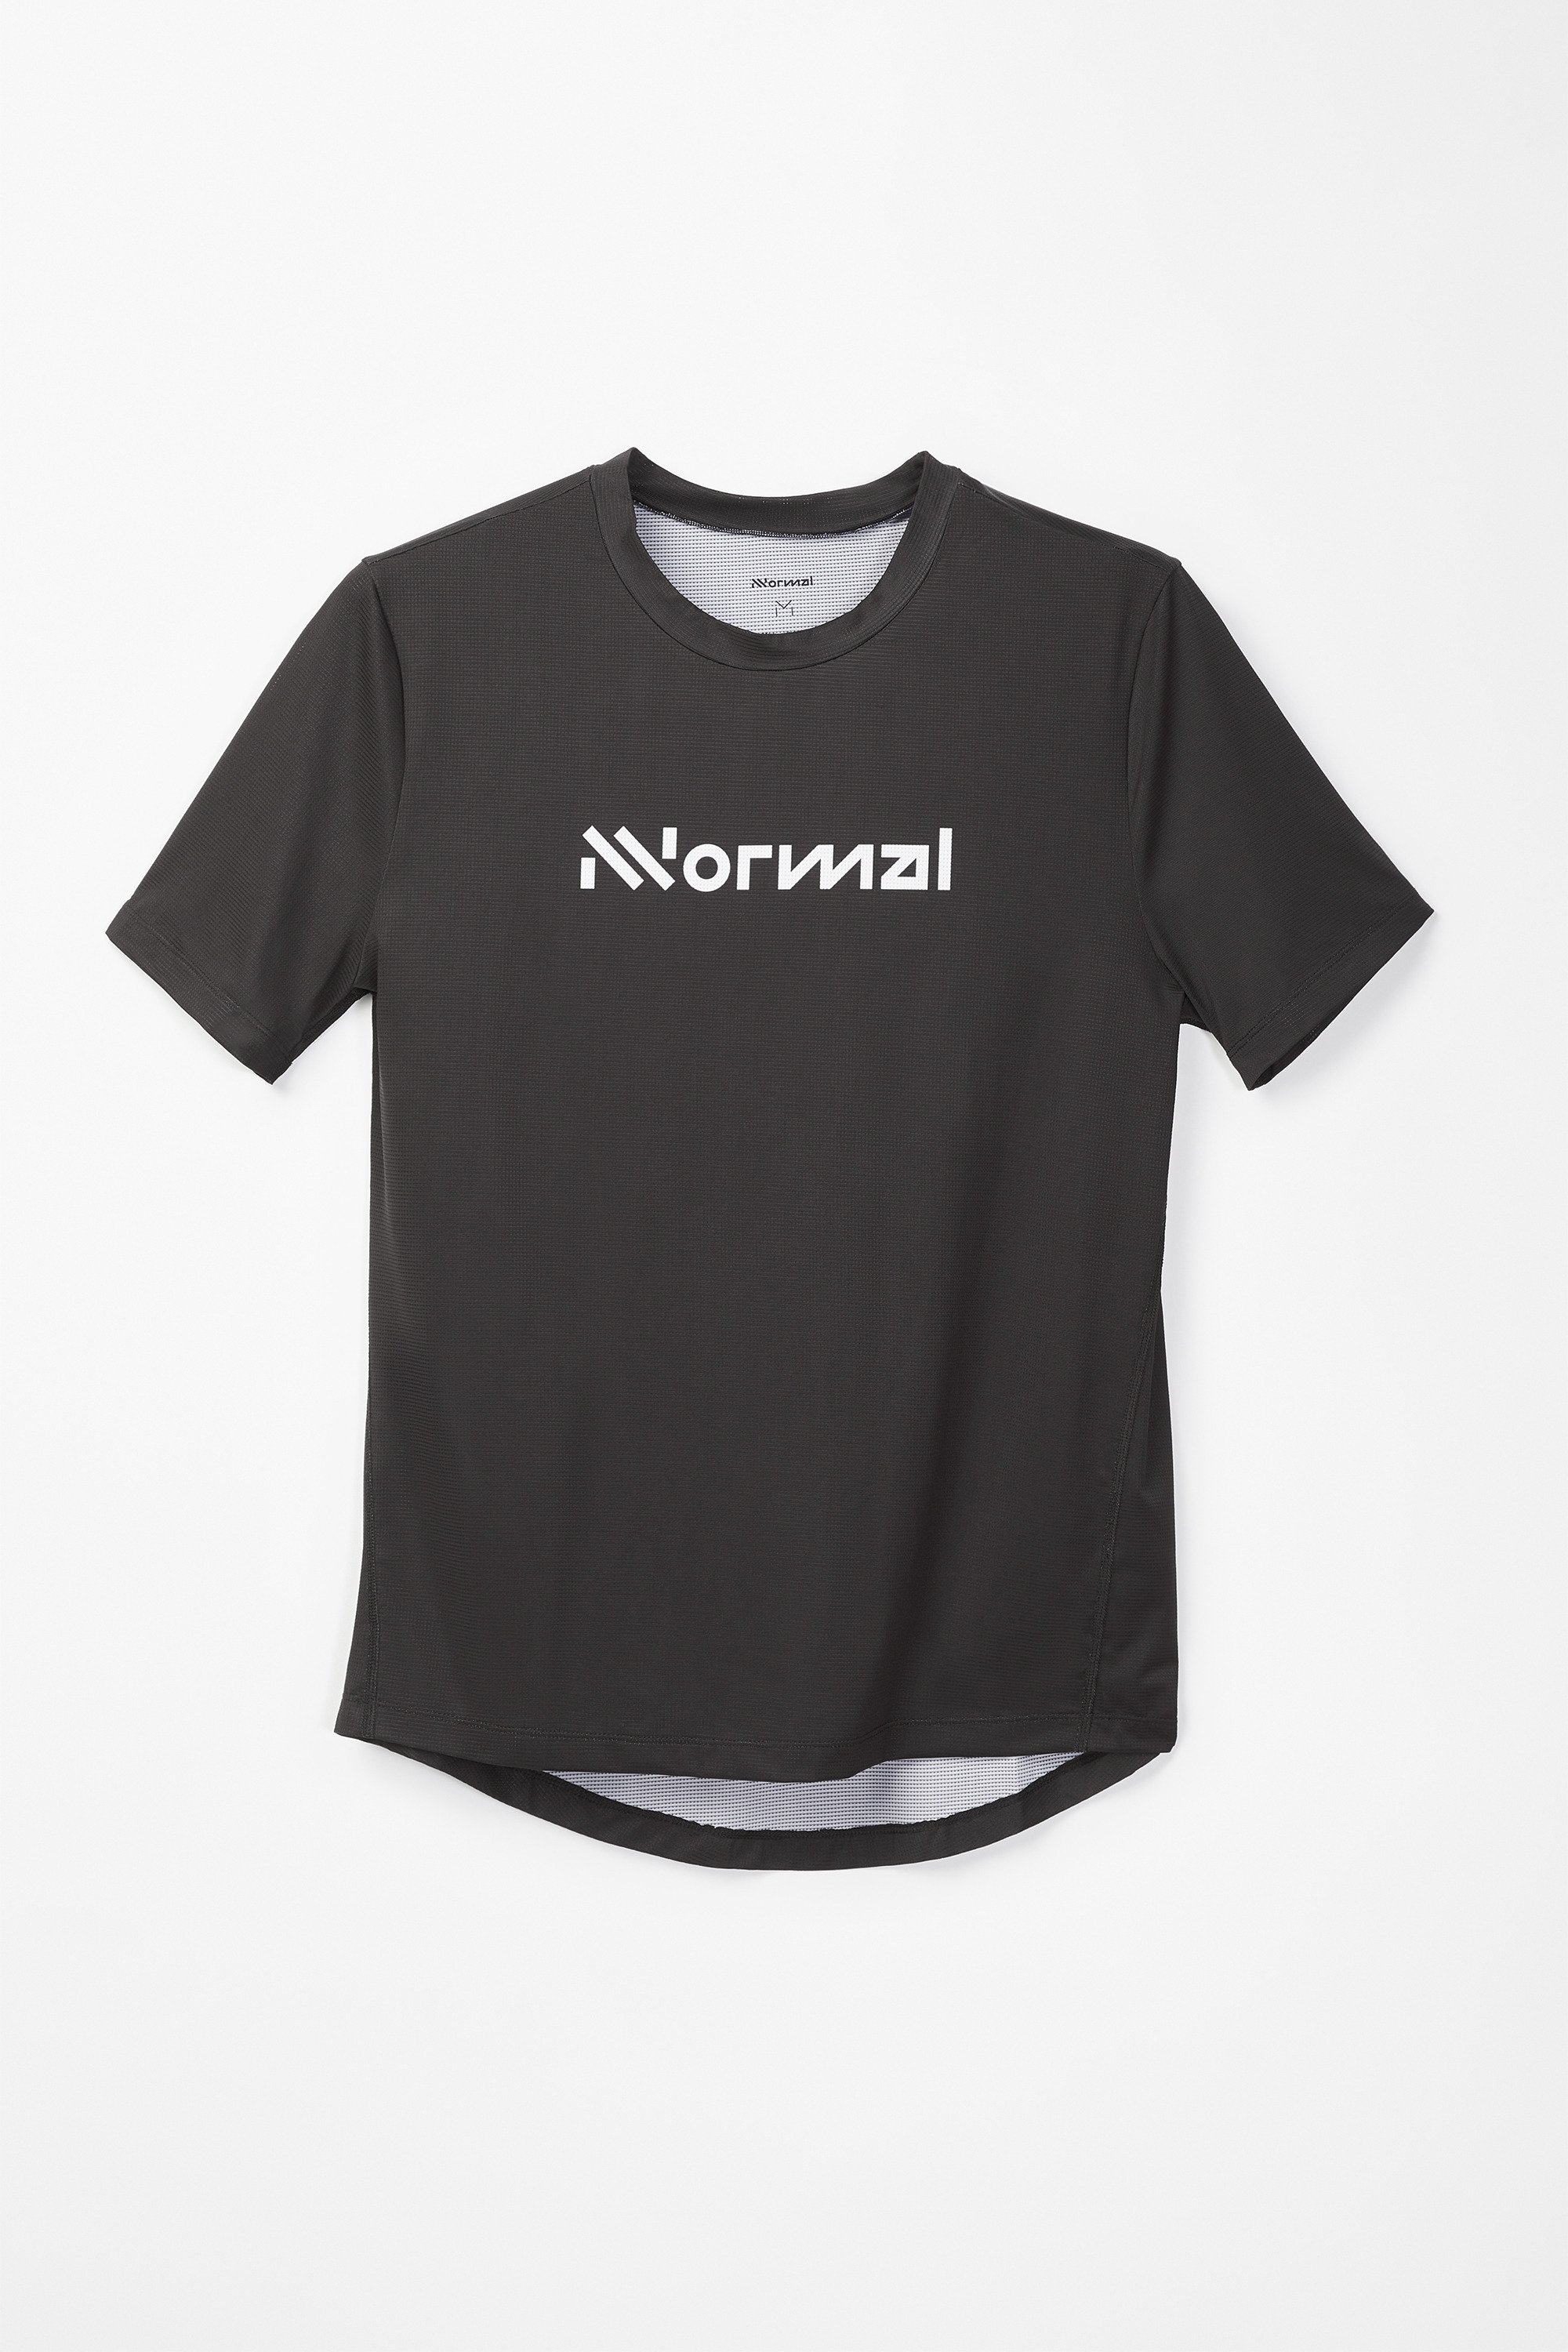 NNormal Men's race t-shirt N1CMTS1-001 Official Store USA